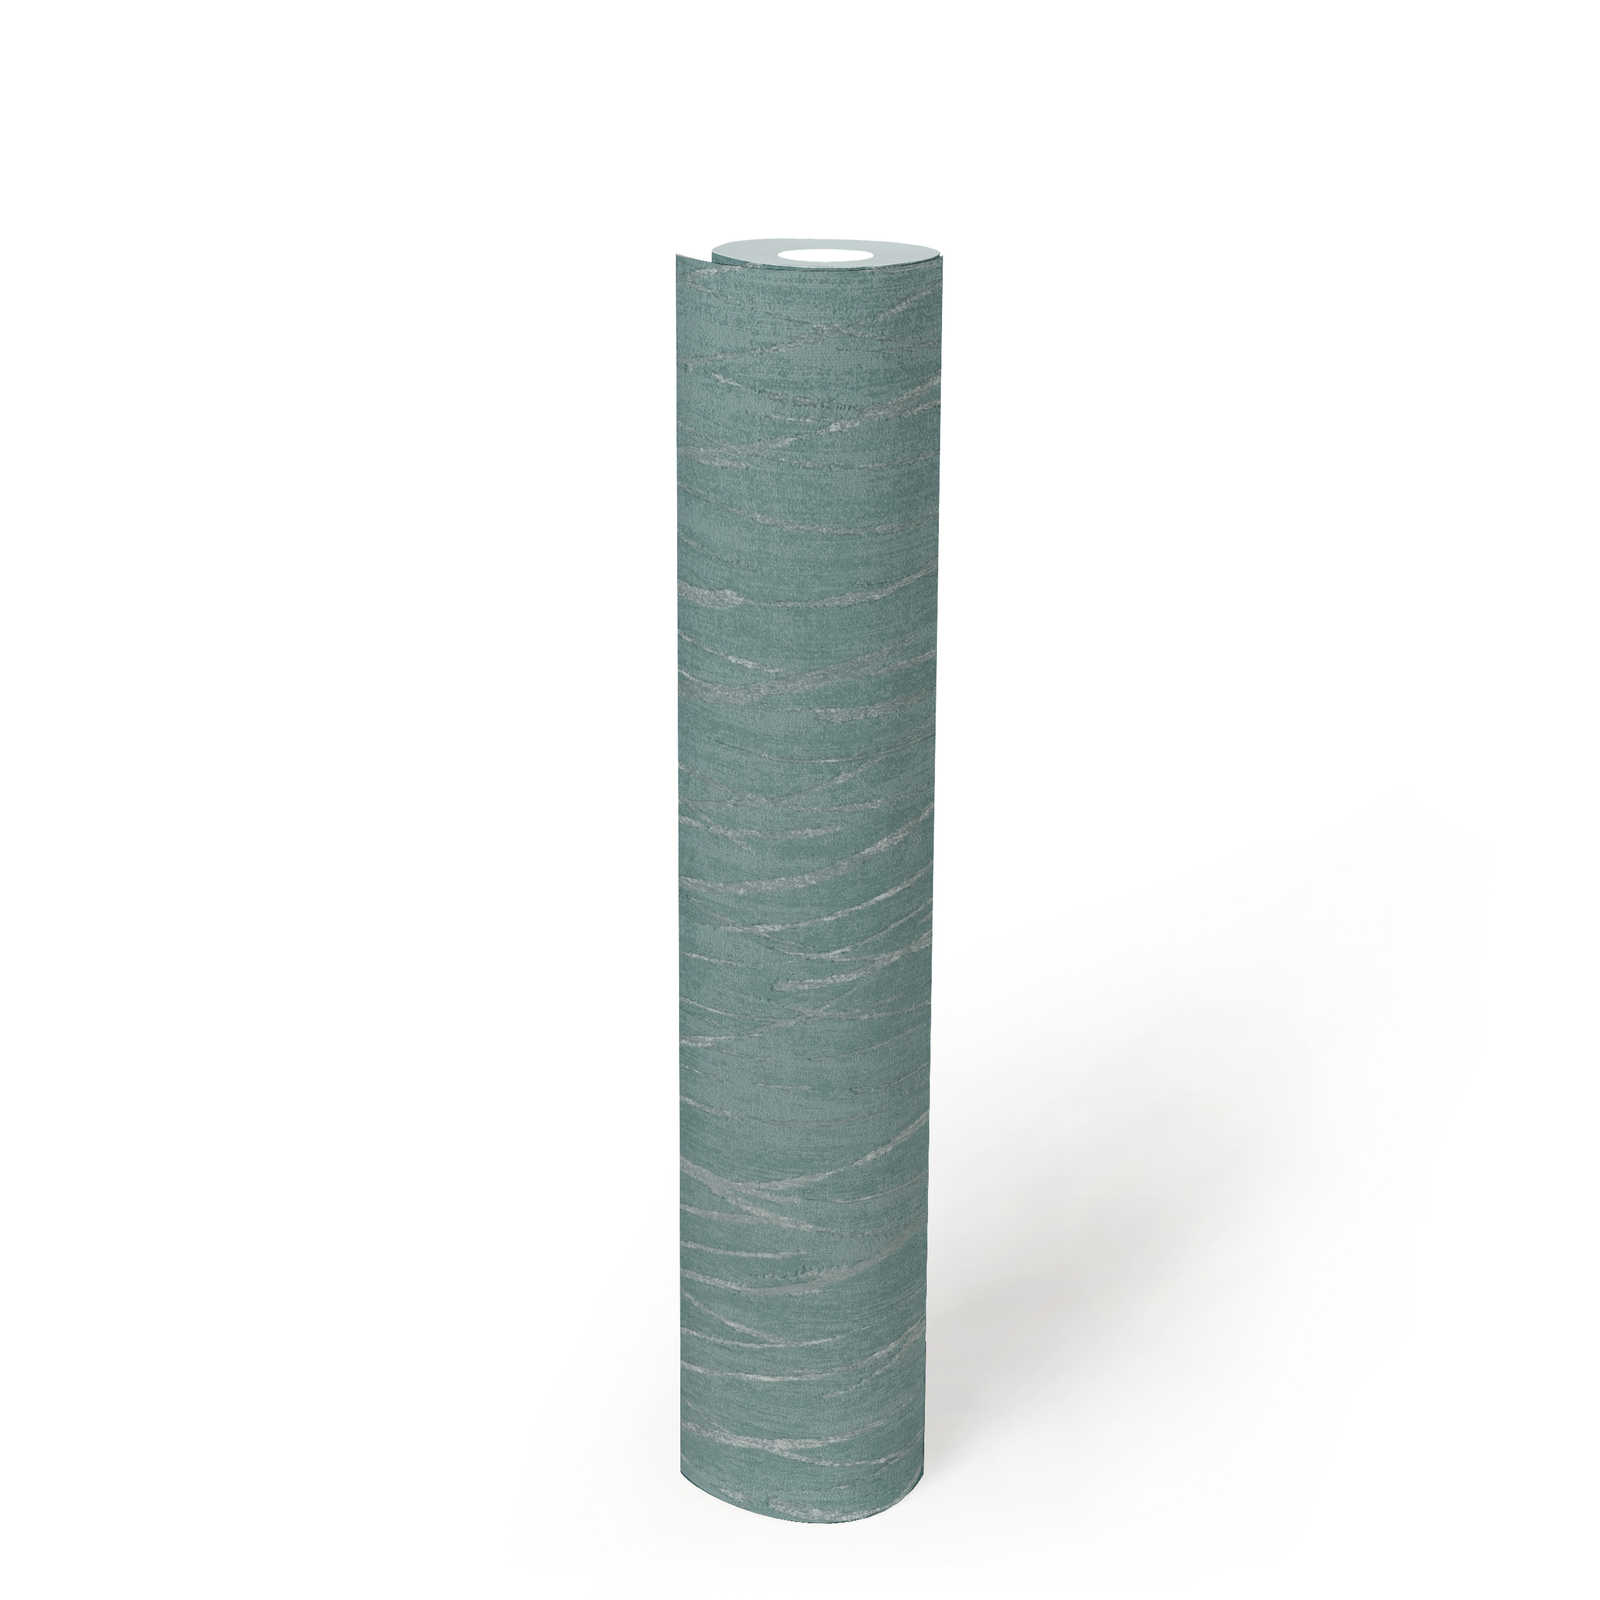             Textured wallpaper with metallic colours - blue, green, silver
        